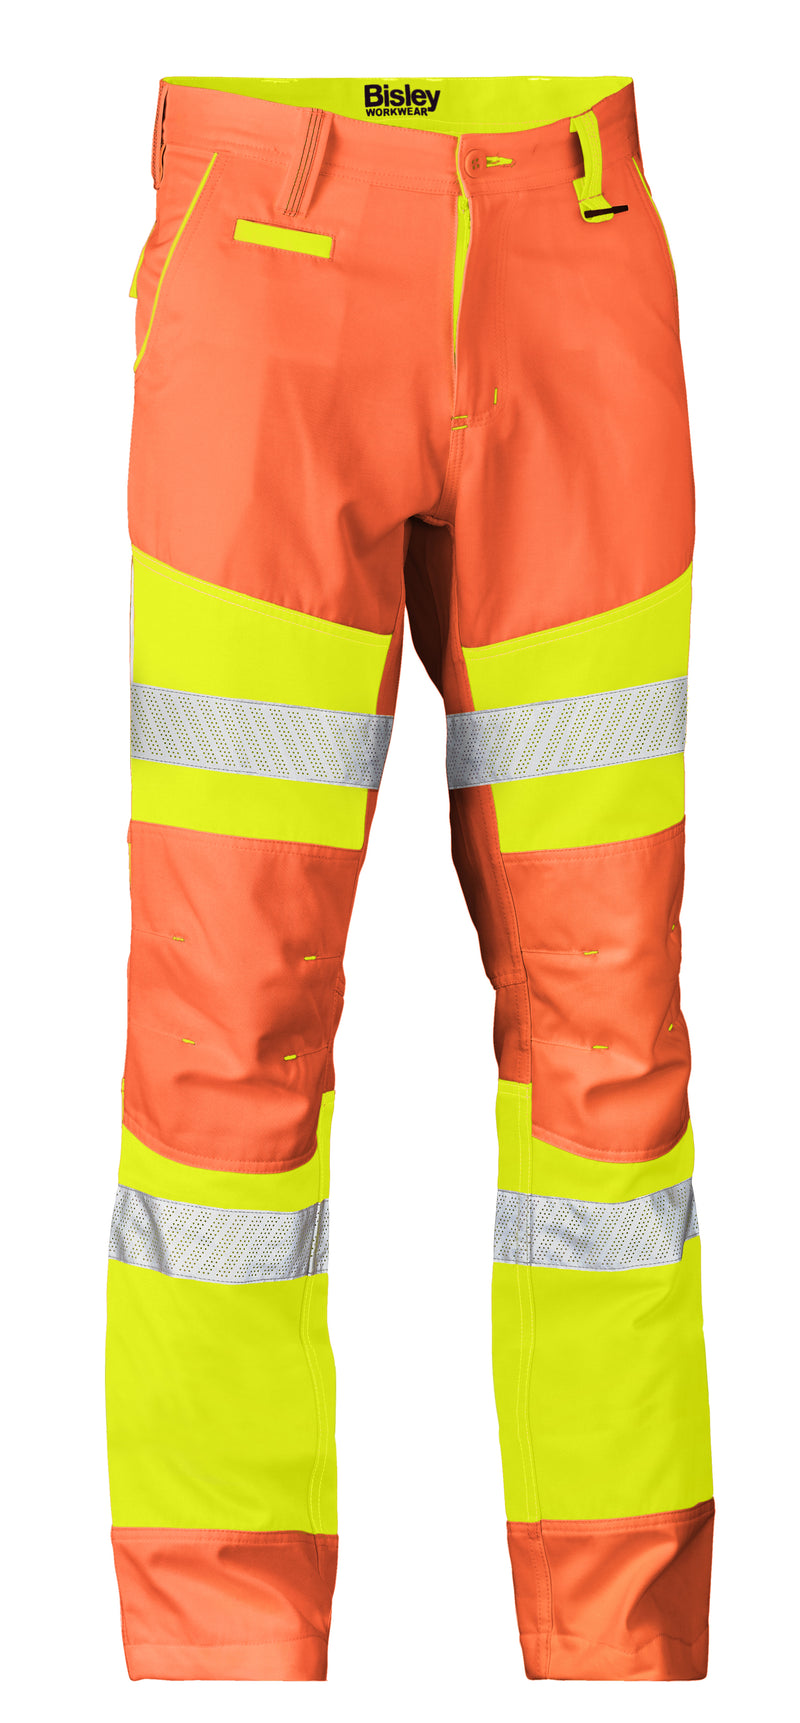 Load image into Gallery viewer, Wholesale BP6411T Bisley Taped Biomotion Double Hi Vis Pant - Stout Printed or Blank
